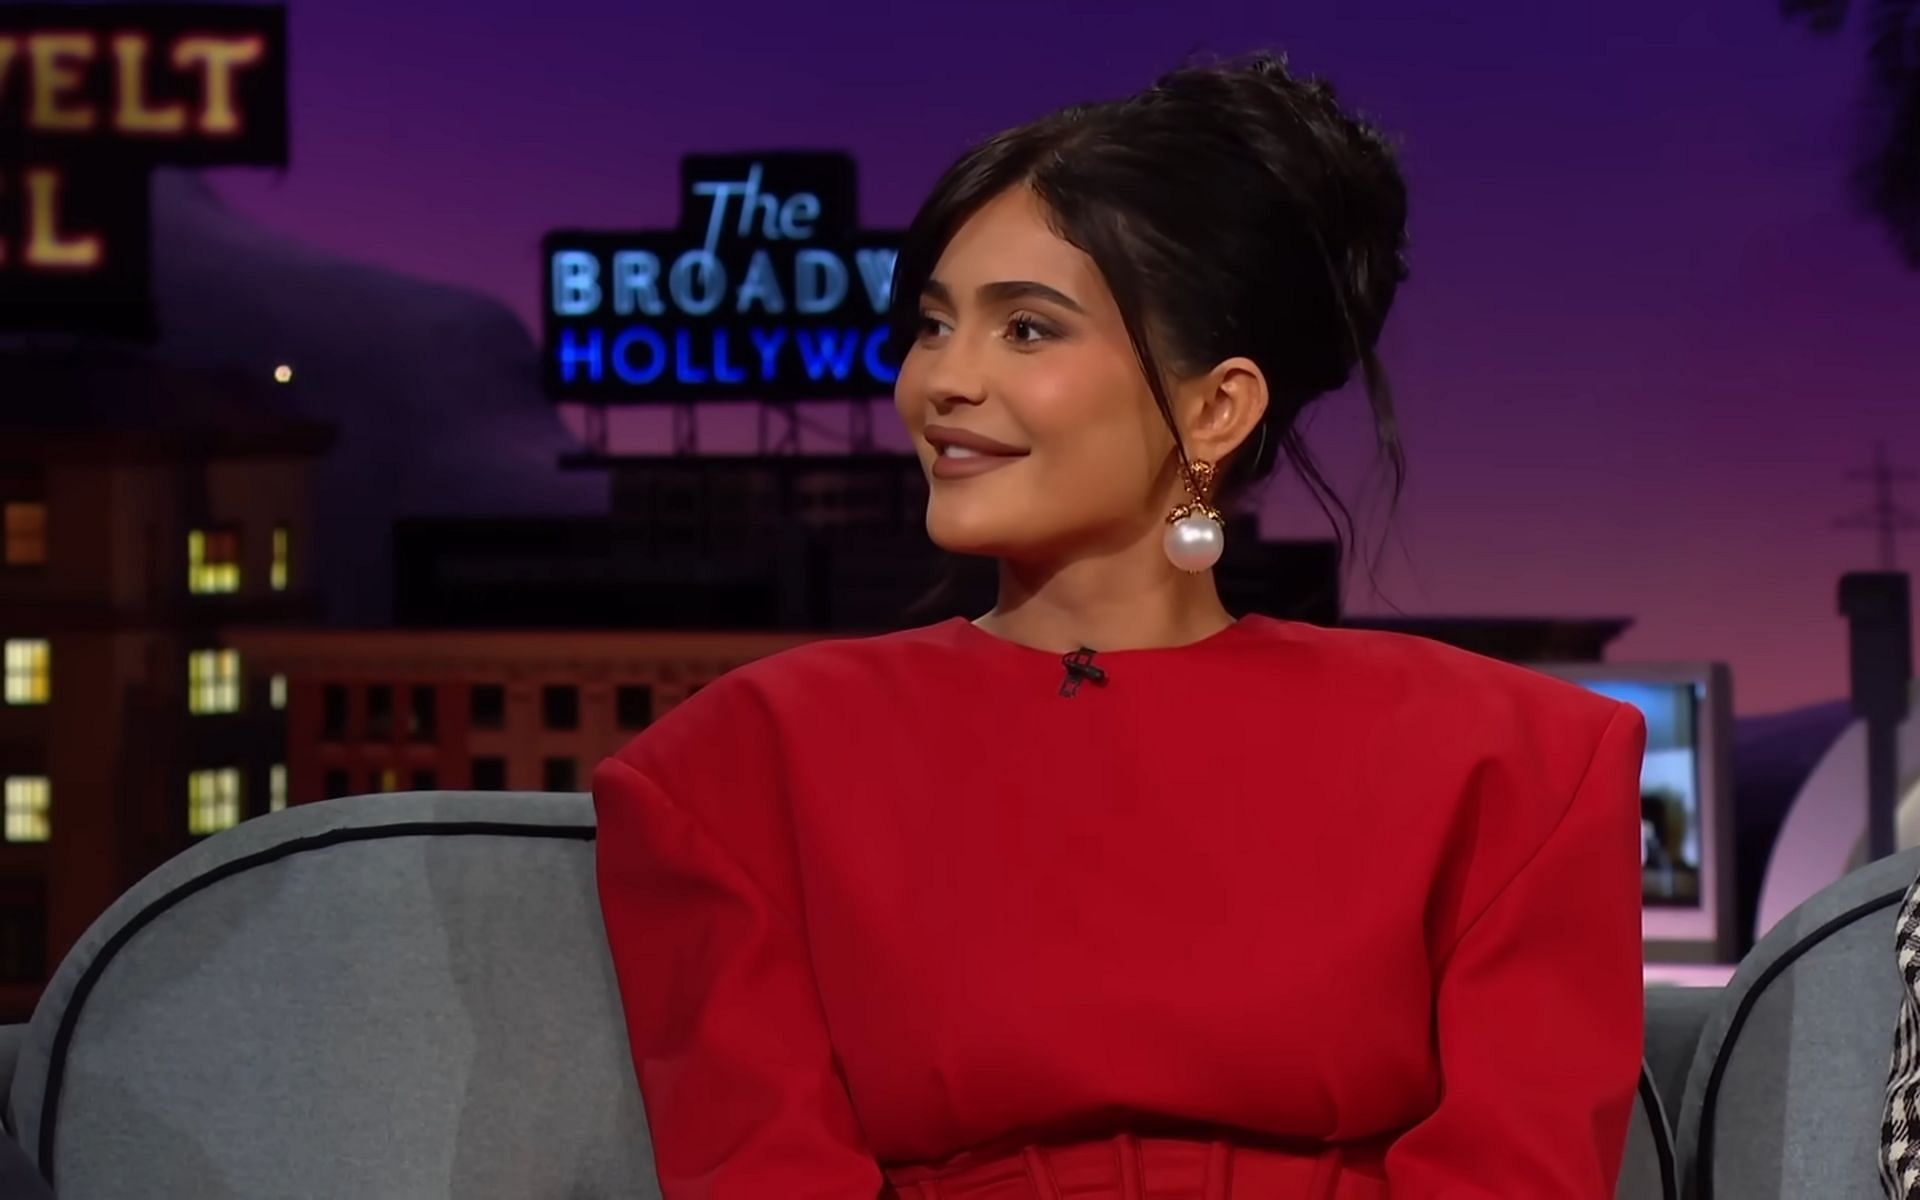 Kylie Jenner confesses about having postpartum struggles after welcoming her second child (Image via YouTube/The Late Late Show with James Corden)